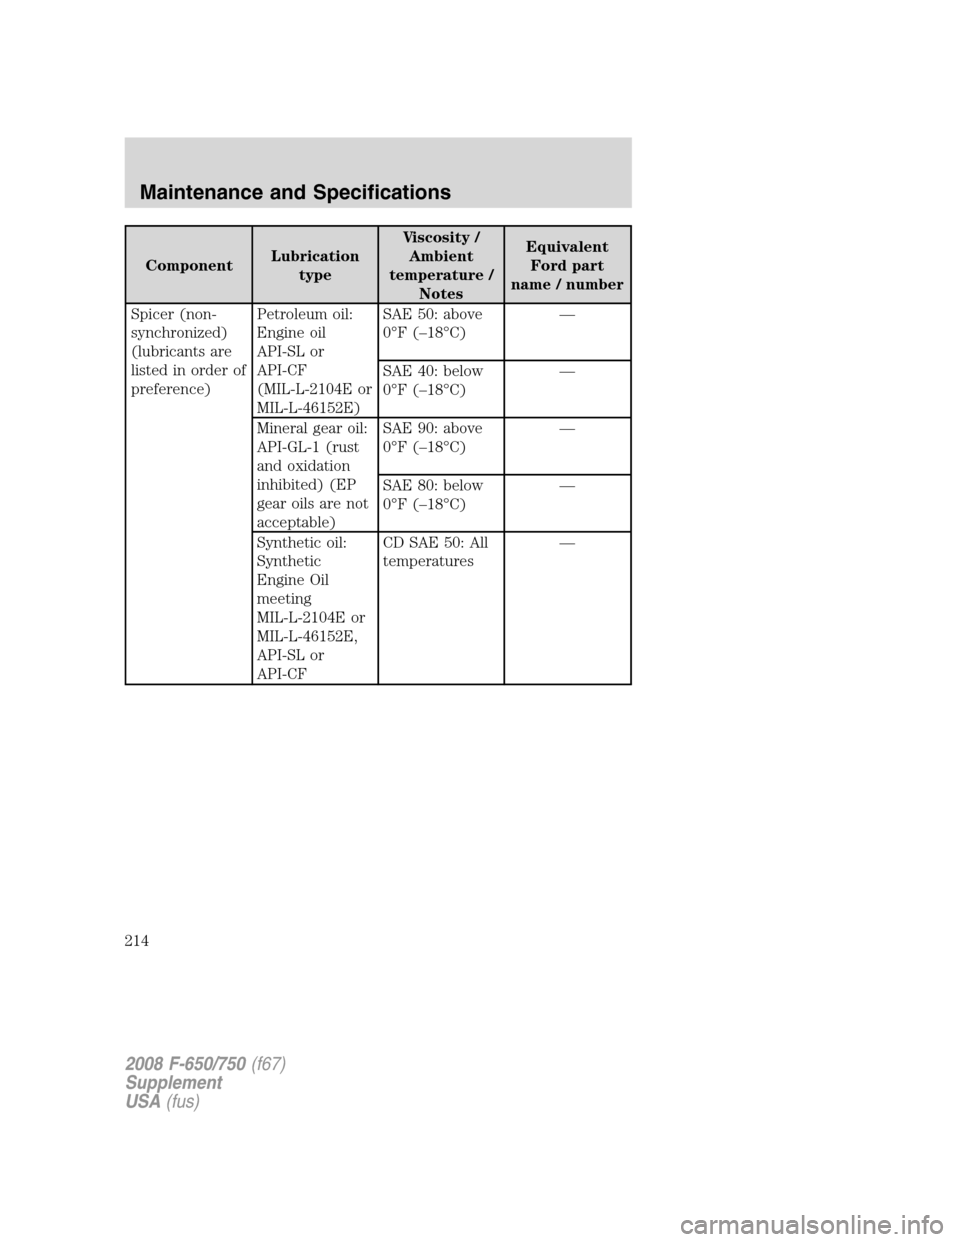 FORD F650 2008 11.G Owners Manual ComponentLubrication
typeViscosity /
Ambient
temperature /
NotesEquivalent
Ford part
name / number
Spicer (non-
synchronized)
(lubricants are
listed in order of
preference)Petroleum oil:
Engine oil
AP